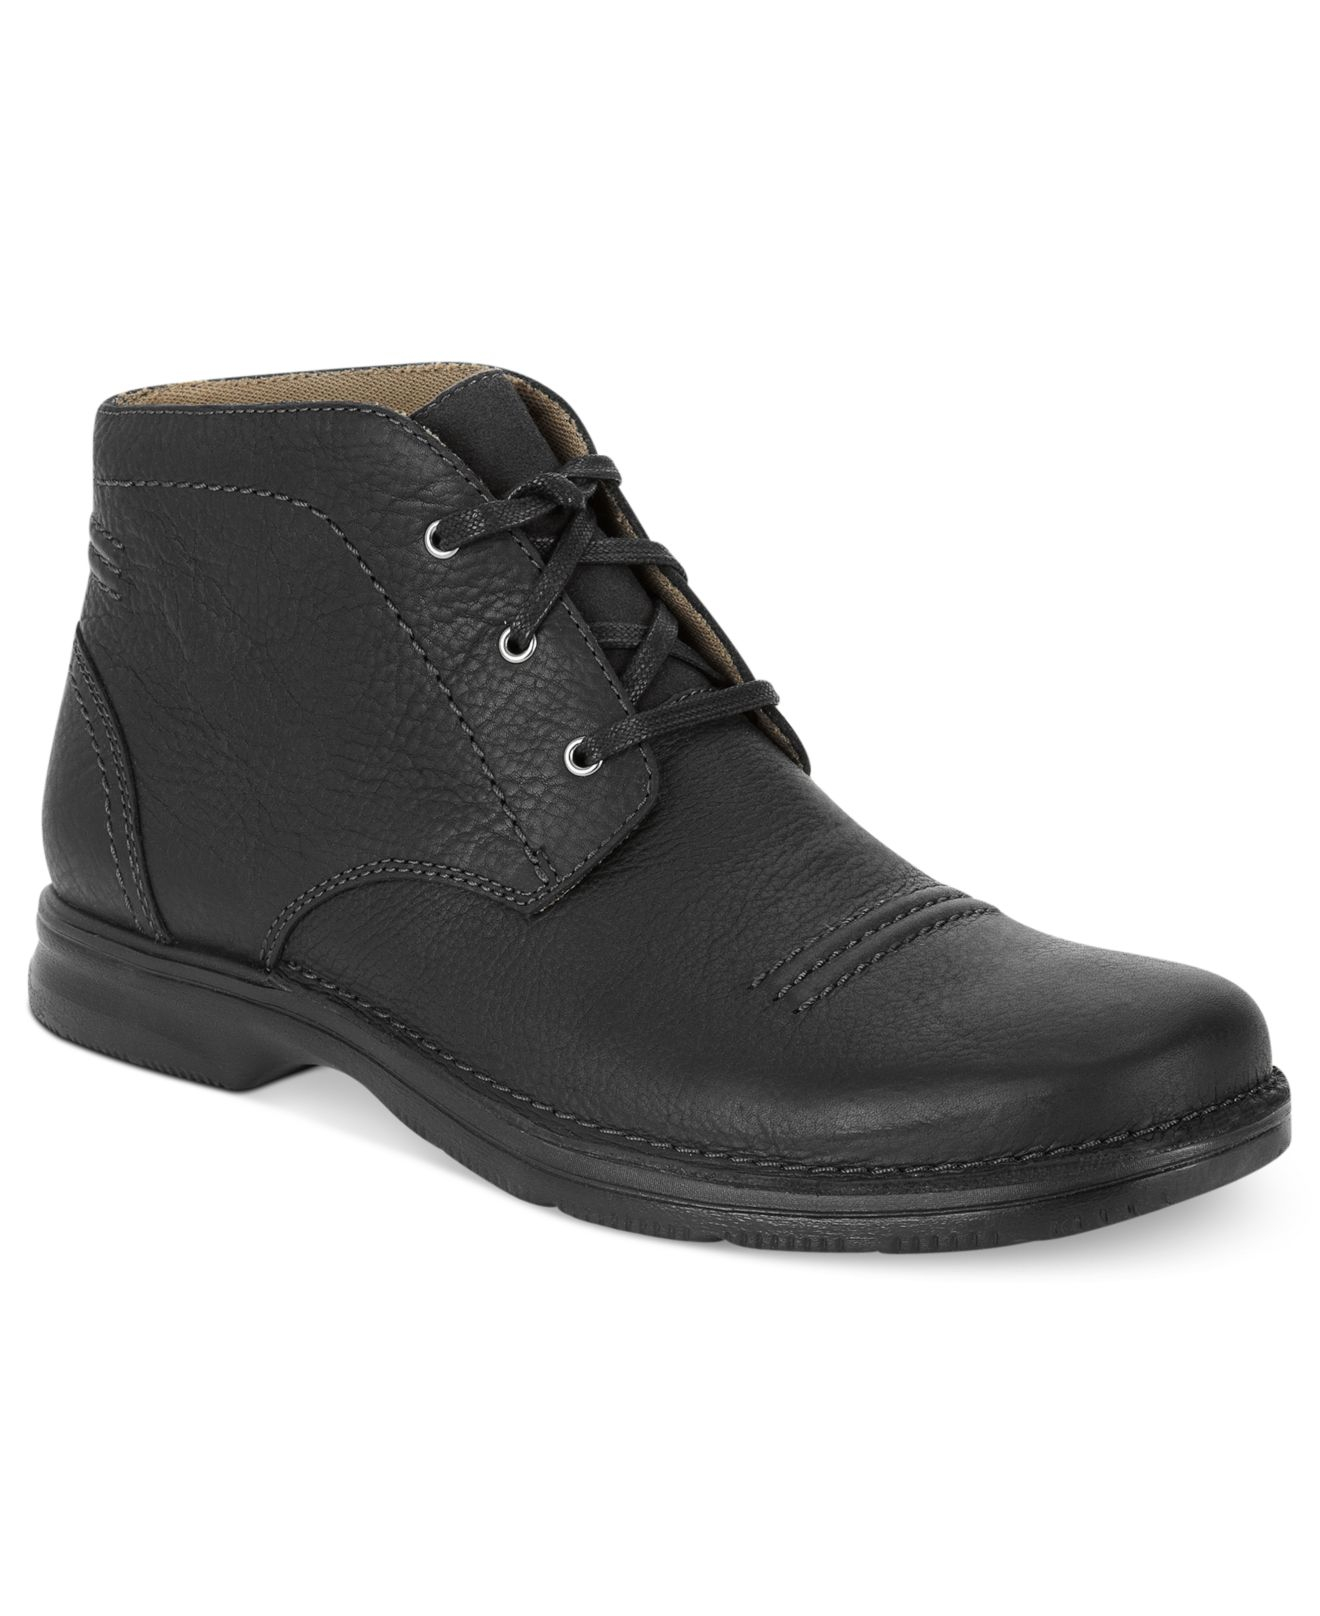 Clarks Senner Drive Lace-Up Boots in Black for Men - Lyst